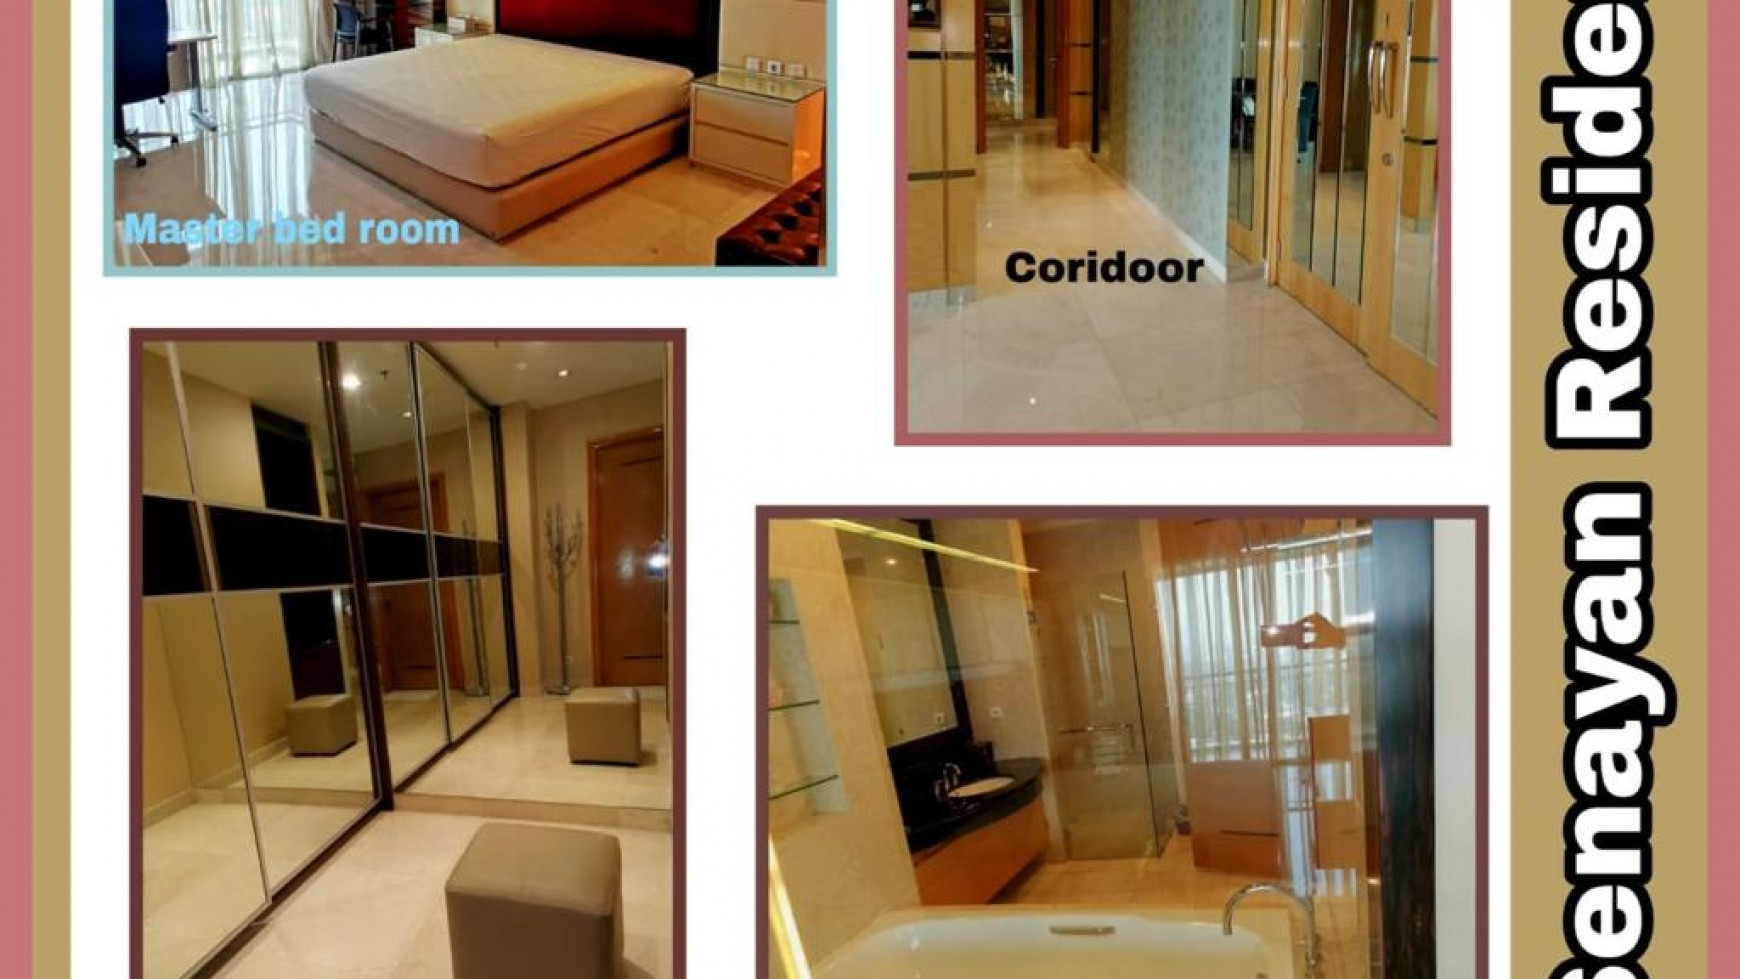 For Rent 3BR+1 Fully Furnished w/ Golf Course view @ Senayan Residence